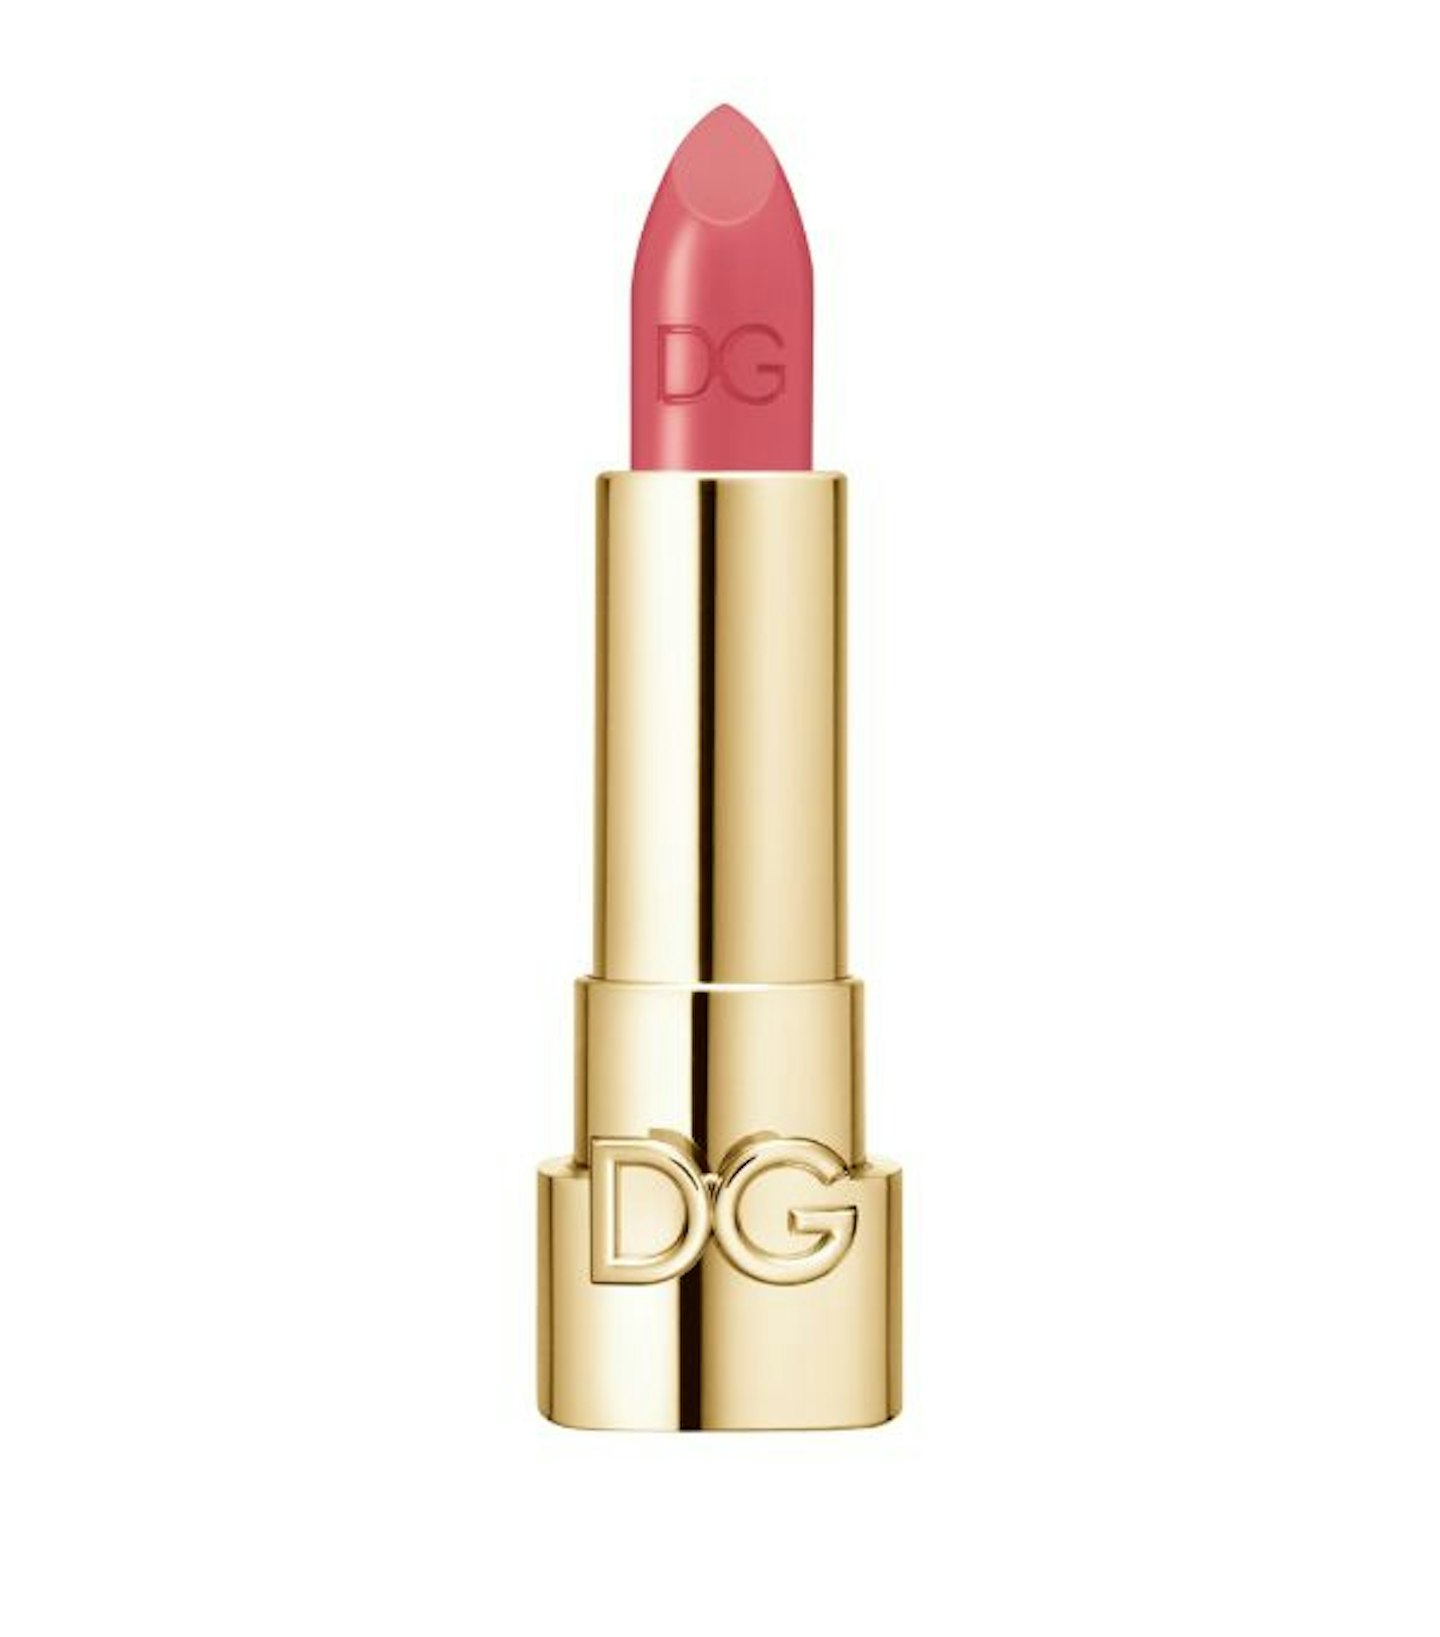 Dolce & Gabbana The Only One Luminous Colour Lipstick in 230 Bellezza, from £30